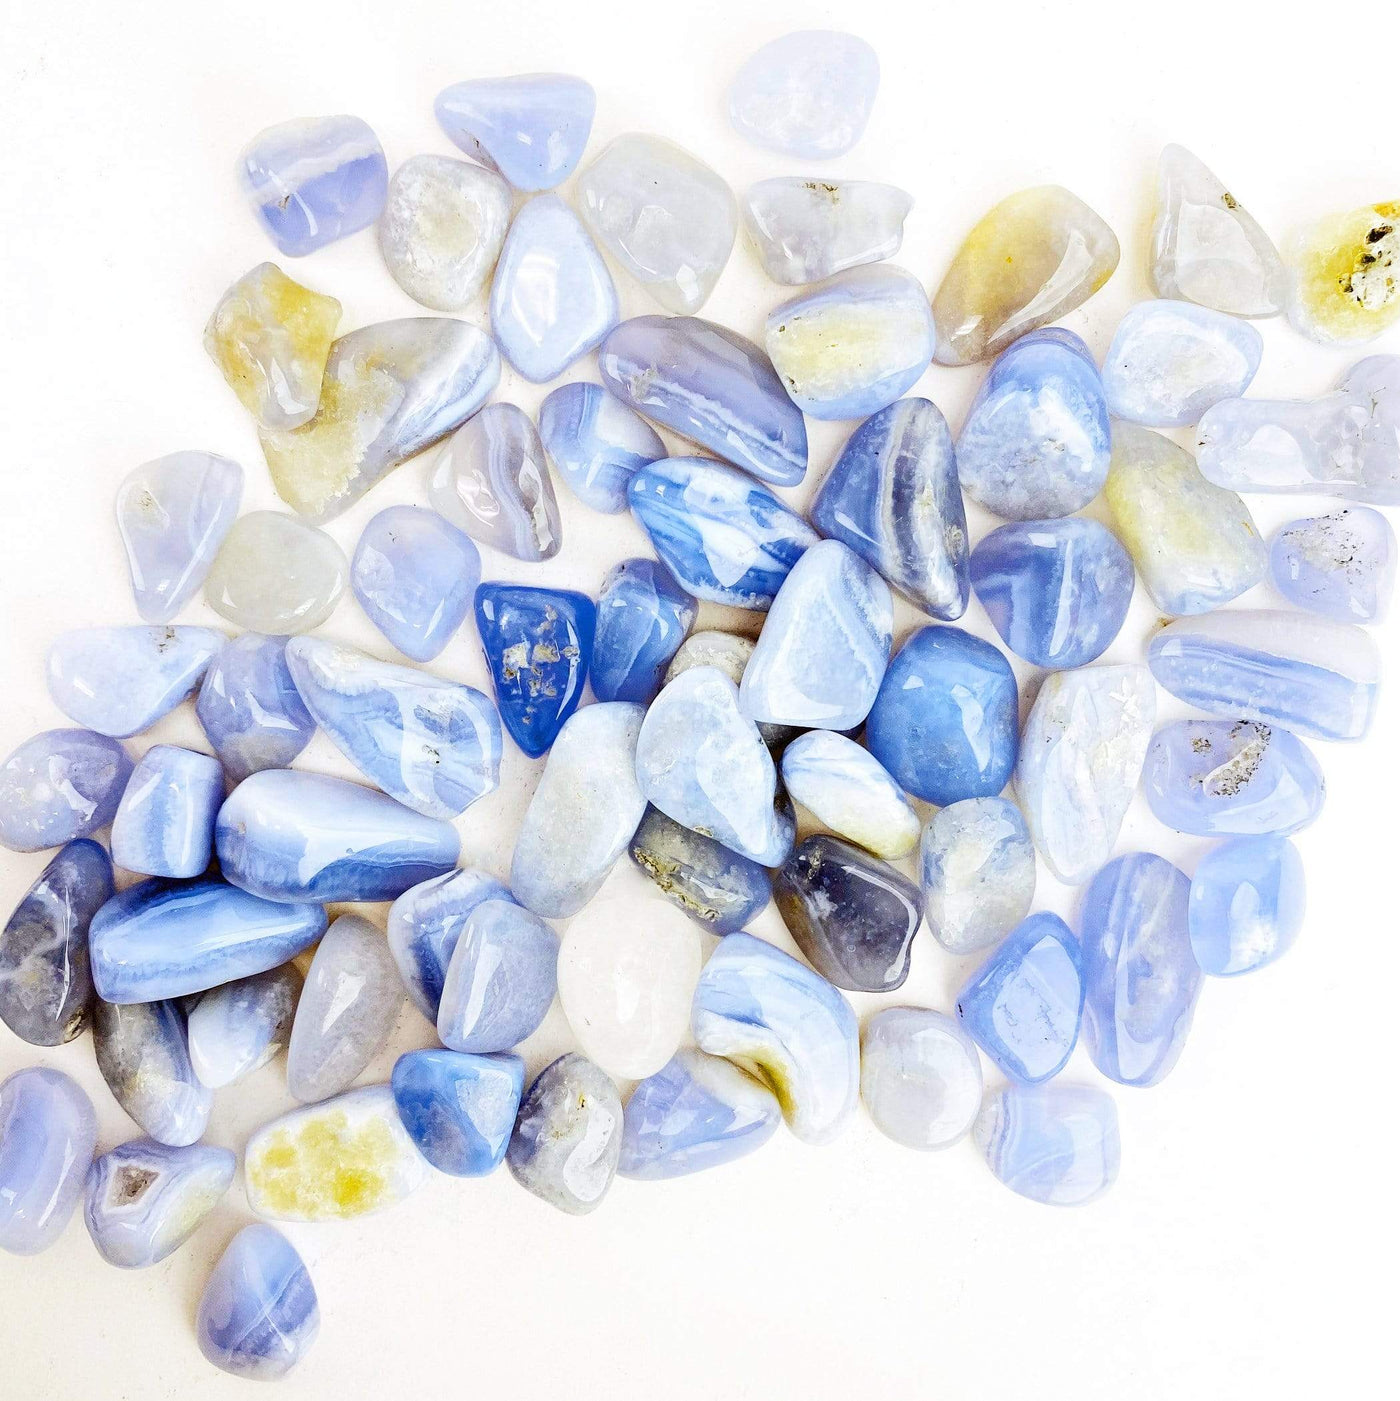 Blue Lace Agate Small Tumbled Stones spread out on a table